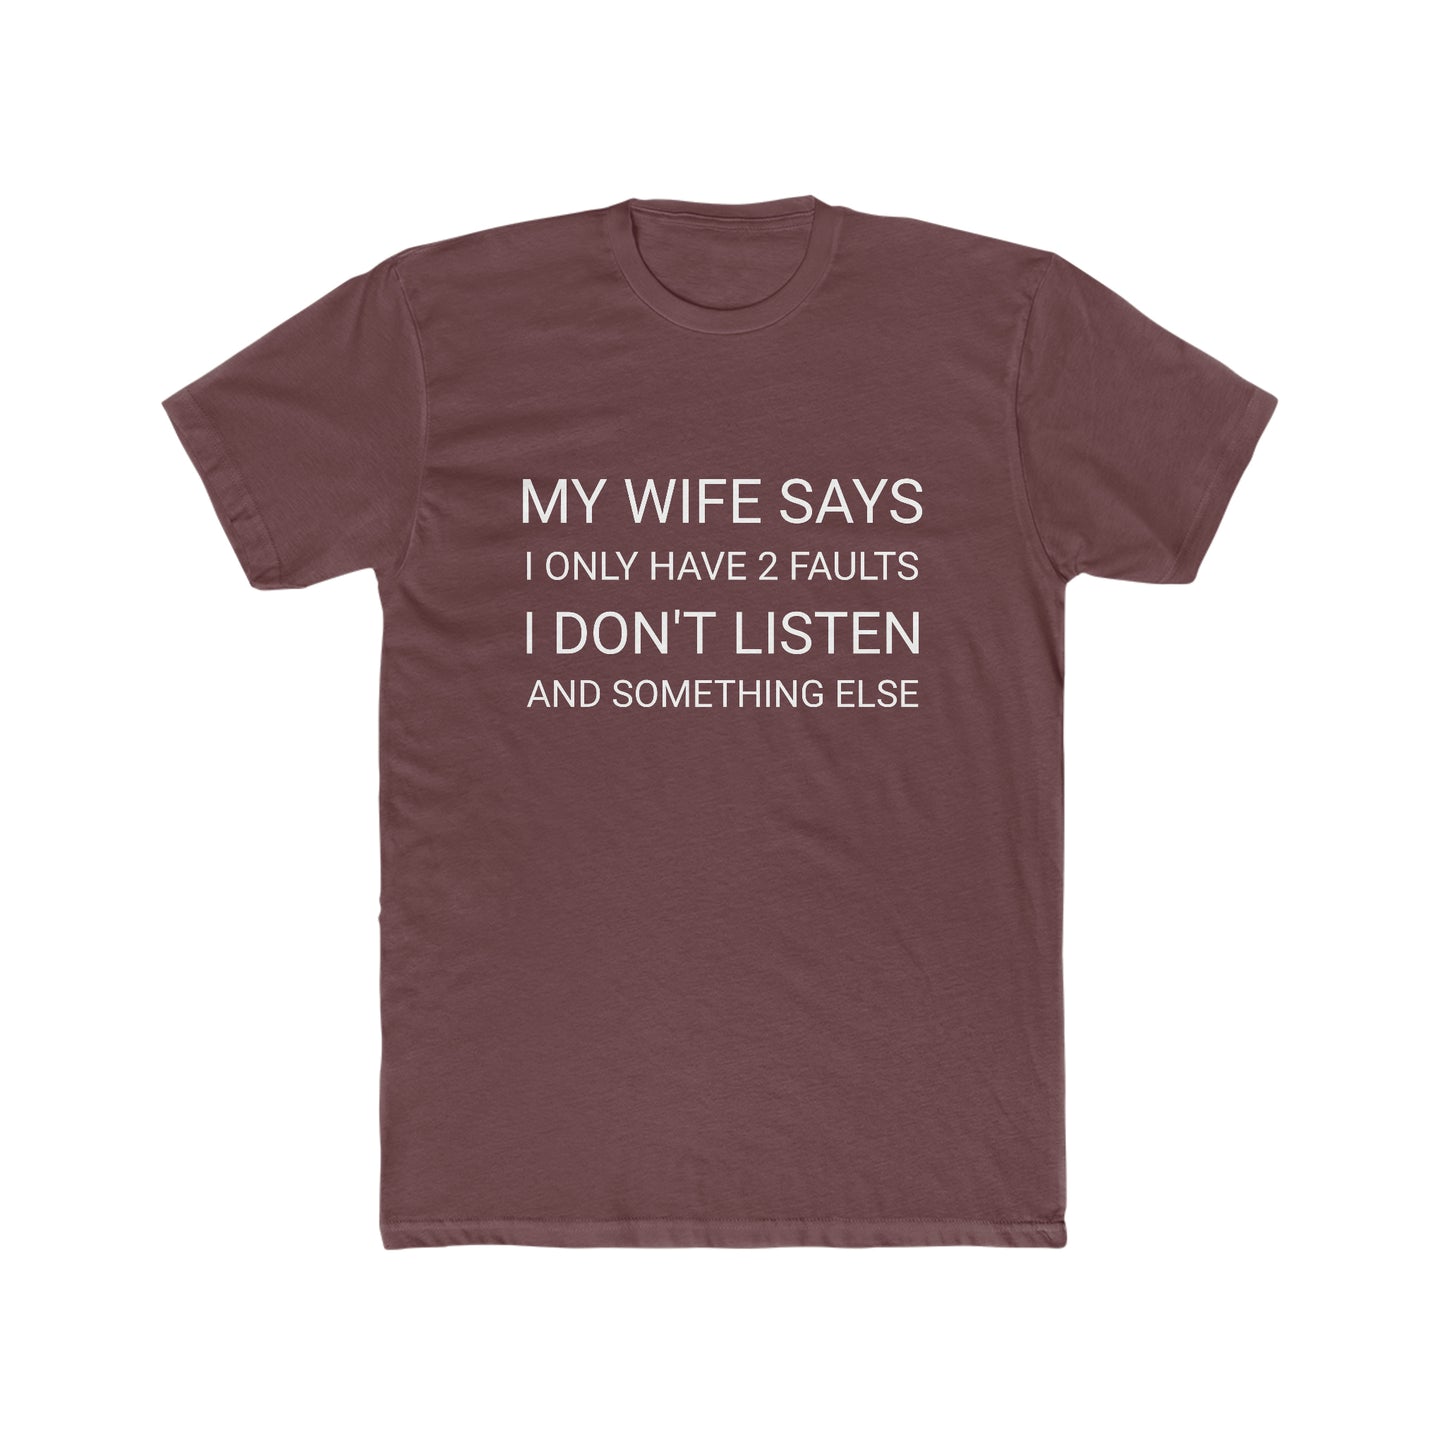 My Wife Says I Only Have 2 Faults Men's Cotton Crew Tee